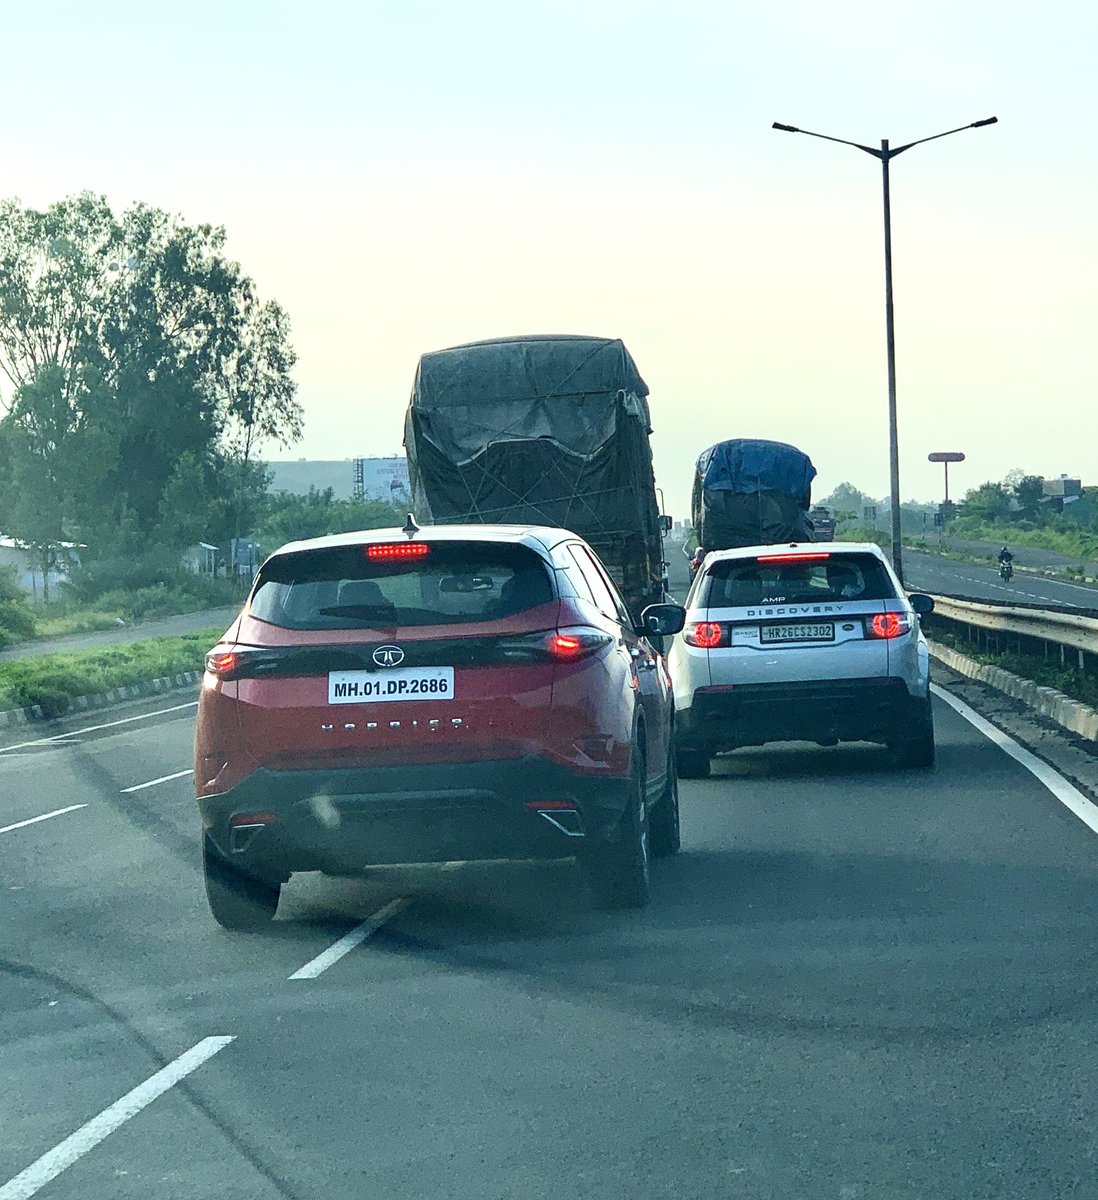 Same #DNA, but obviously I'm better looking.@BosePratap @TataMotors_Cars @TataMotors #Tatamotors #Harrier #LandRover #AboveAll #tatasons #DiscoverySport #adventure #FridayFeeling #SUV #HighWay #roadtrip #NextLevel #designers #safety #Luxury #travel #Photos